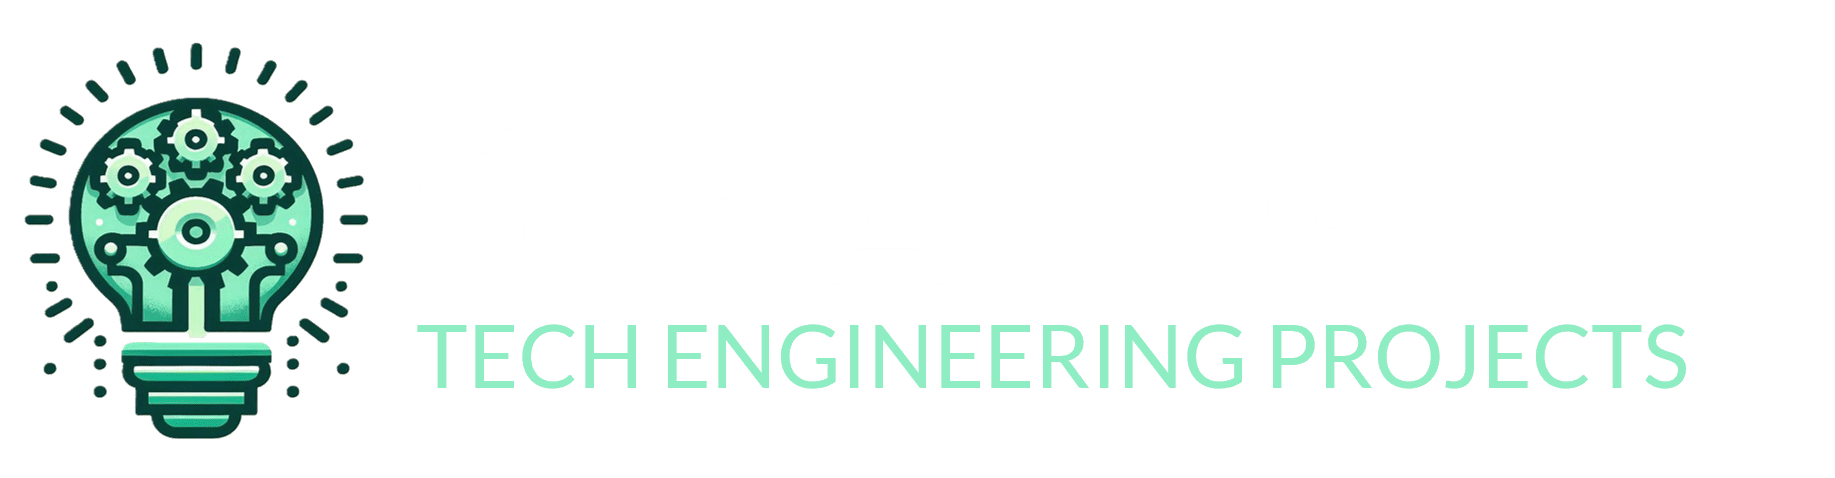 A Jadex Strategic Group branded logo for Tech Engineering Projects featuring a green stylized light bulb with internal gears, symbolizing innovative solutions in technology and engineering.